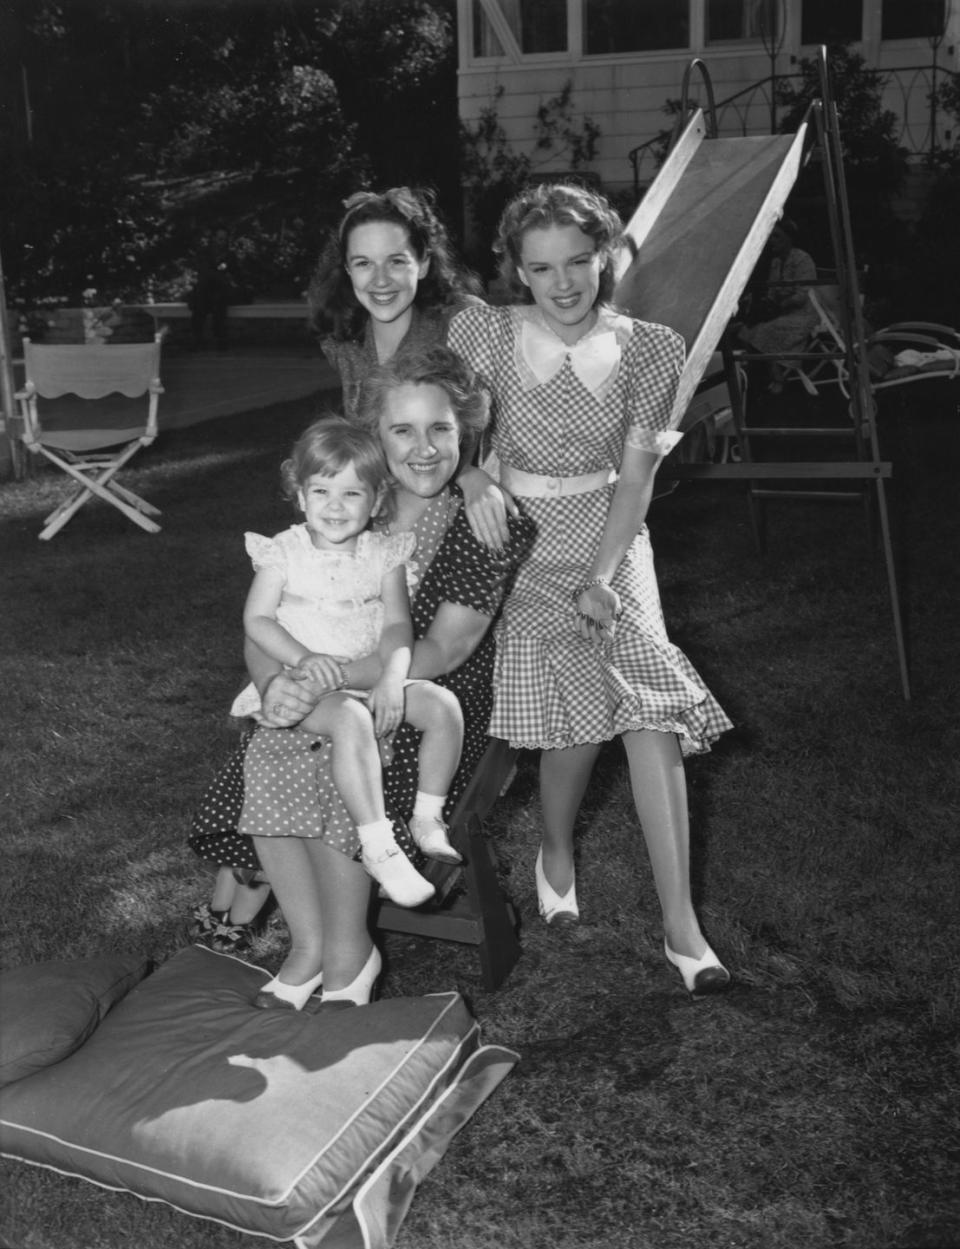 1940: Spending time with family